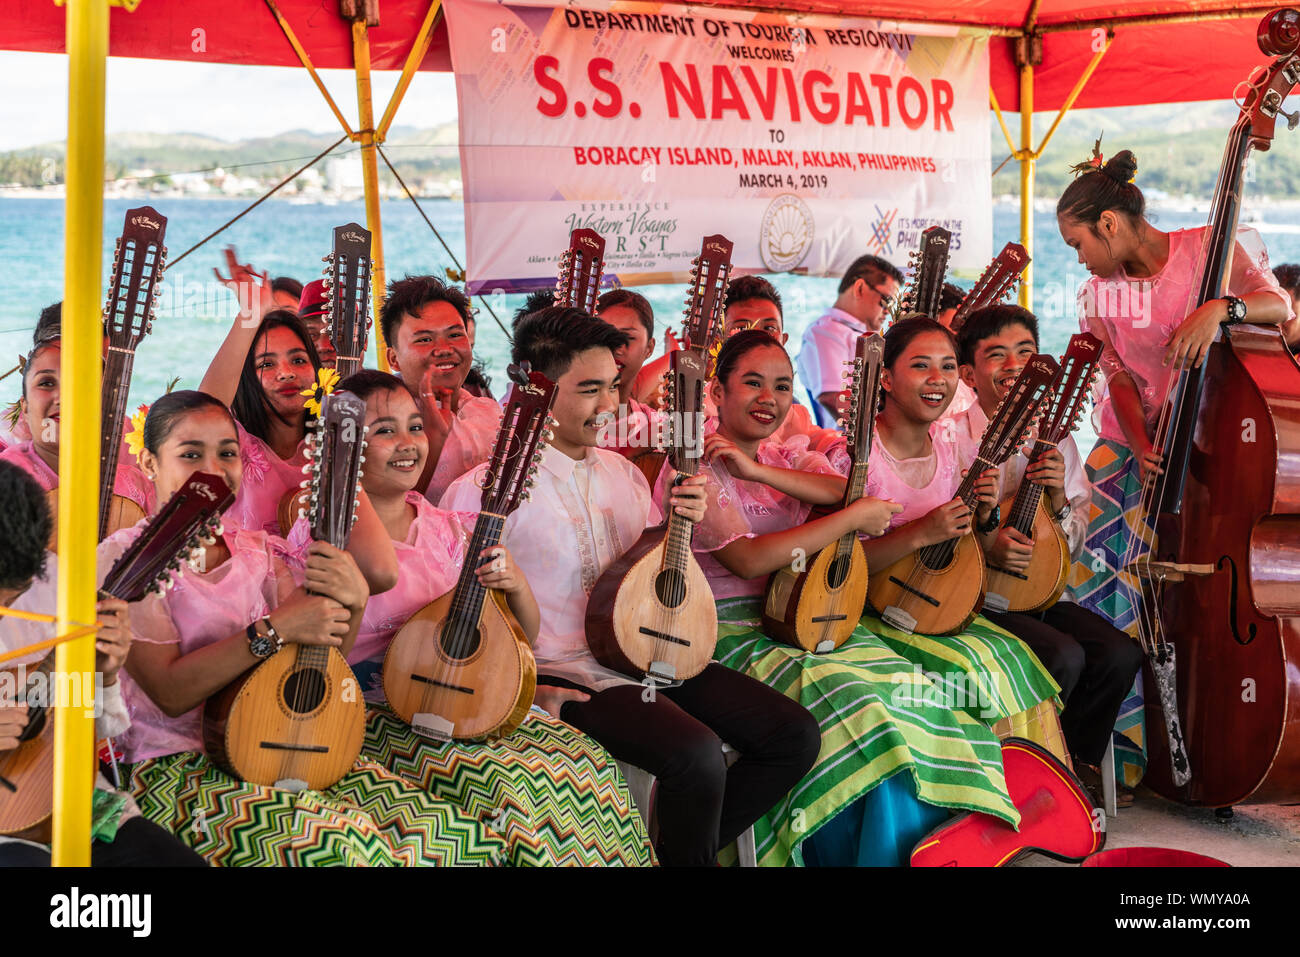 Manoc-Manoc, Boracay, Philippines - March 4, 2019: On Cagban Jetty Port group of traditional folk musicians in folklore dress wellcome tourists of S.S Stock Photo